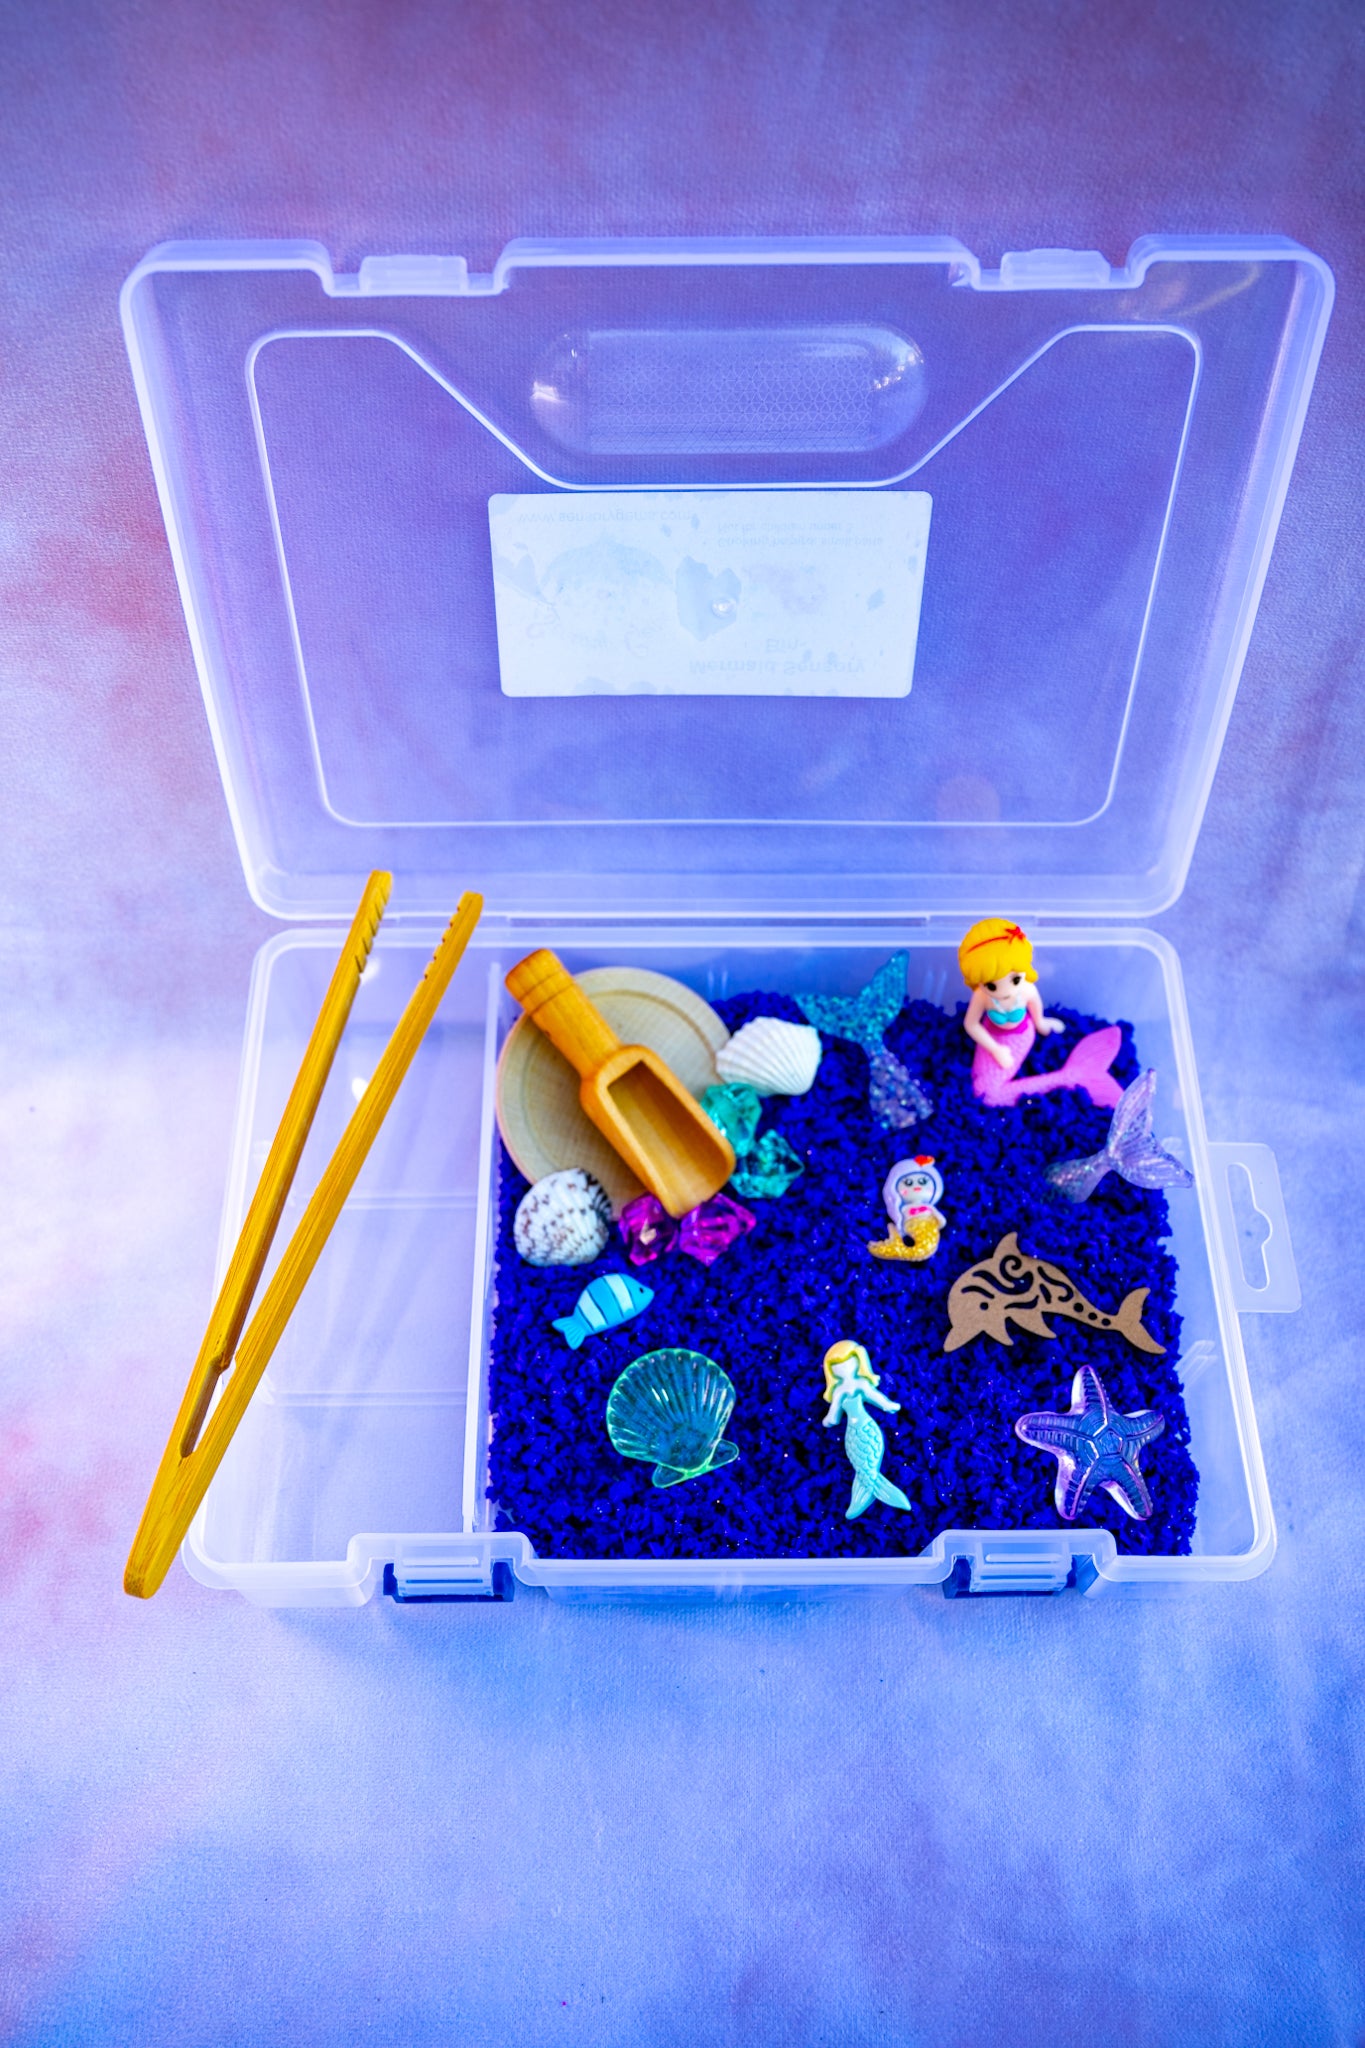 Explore the World with Our Travel-sized Sensory Bins!